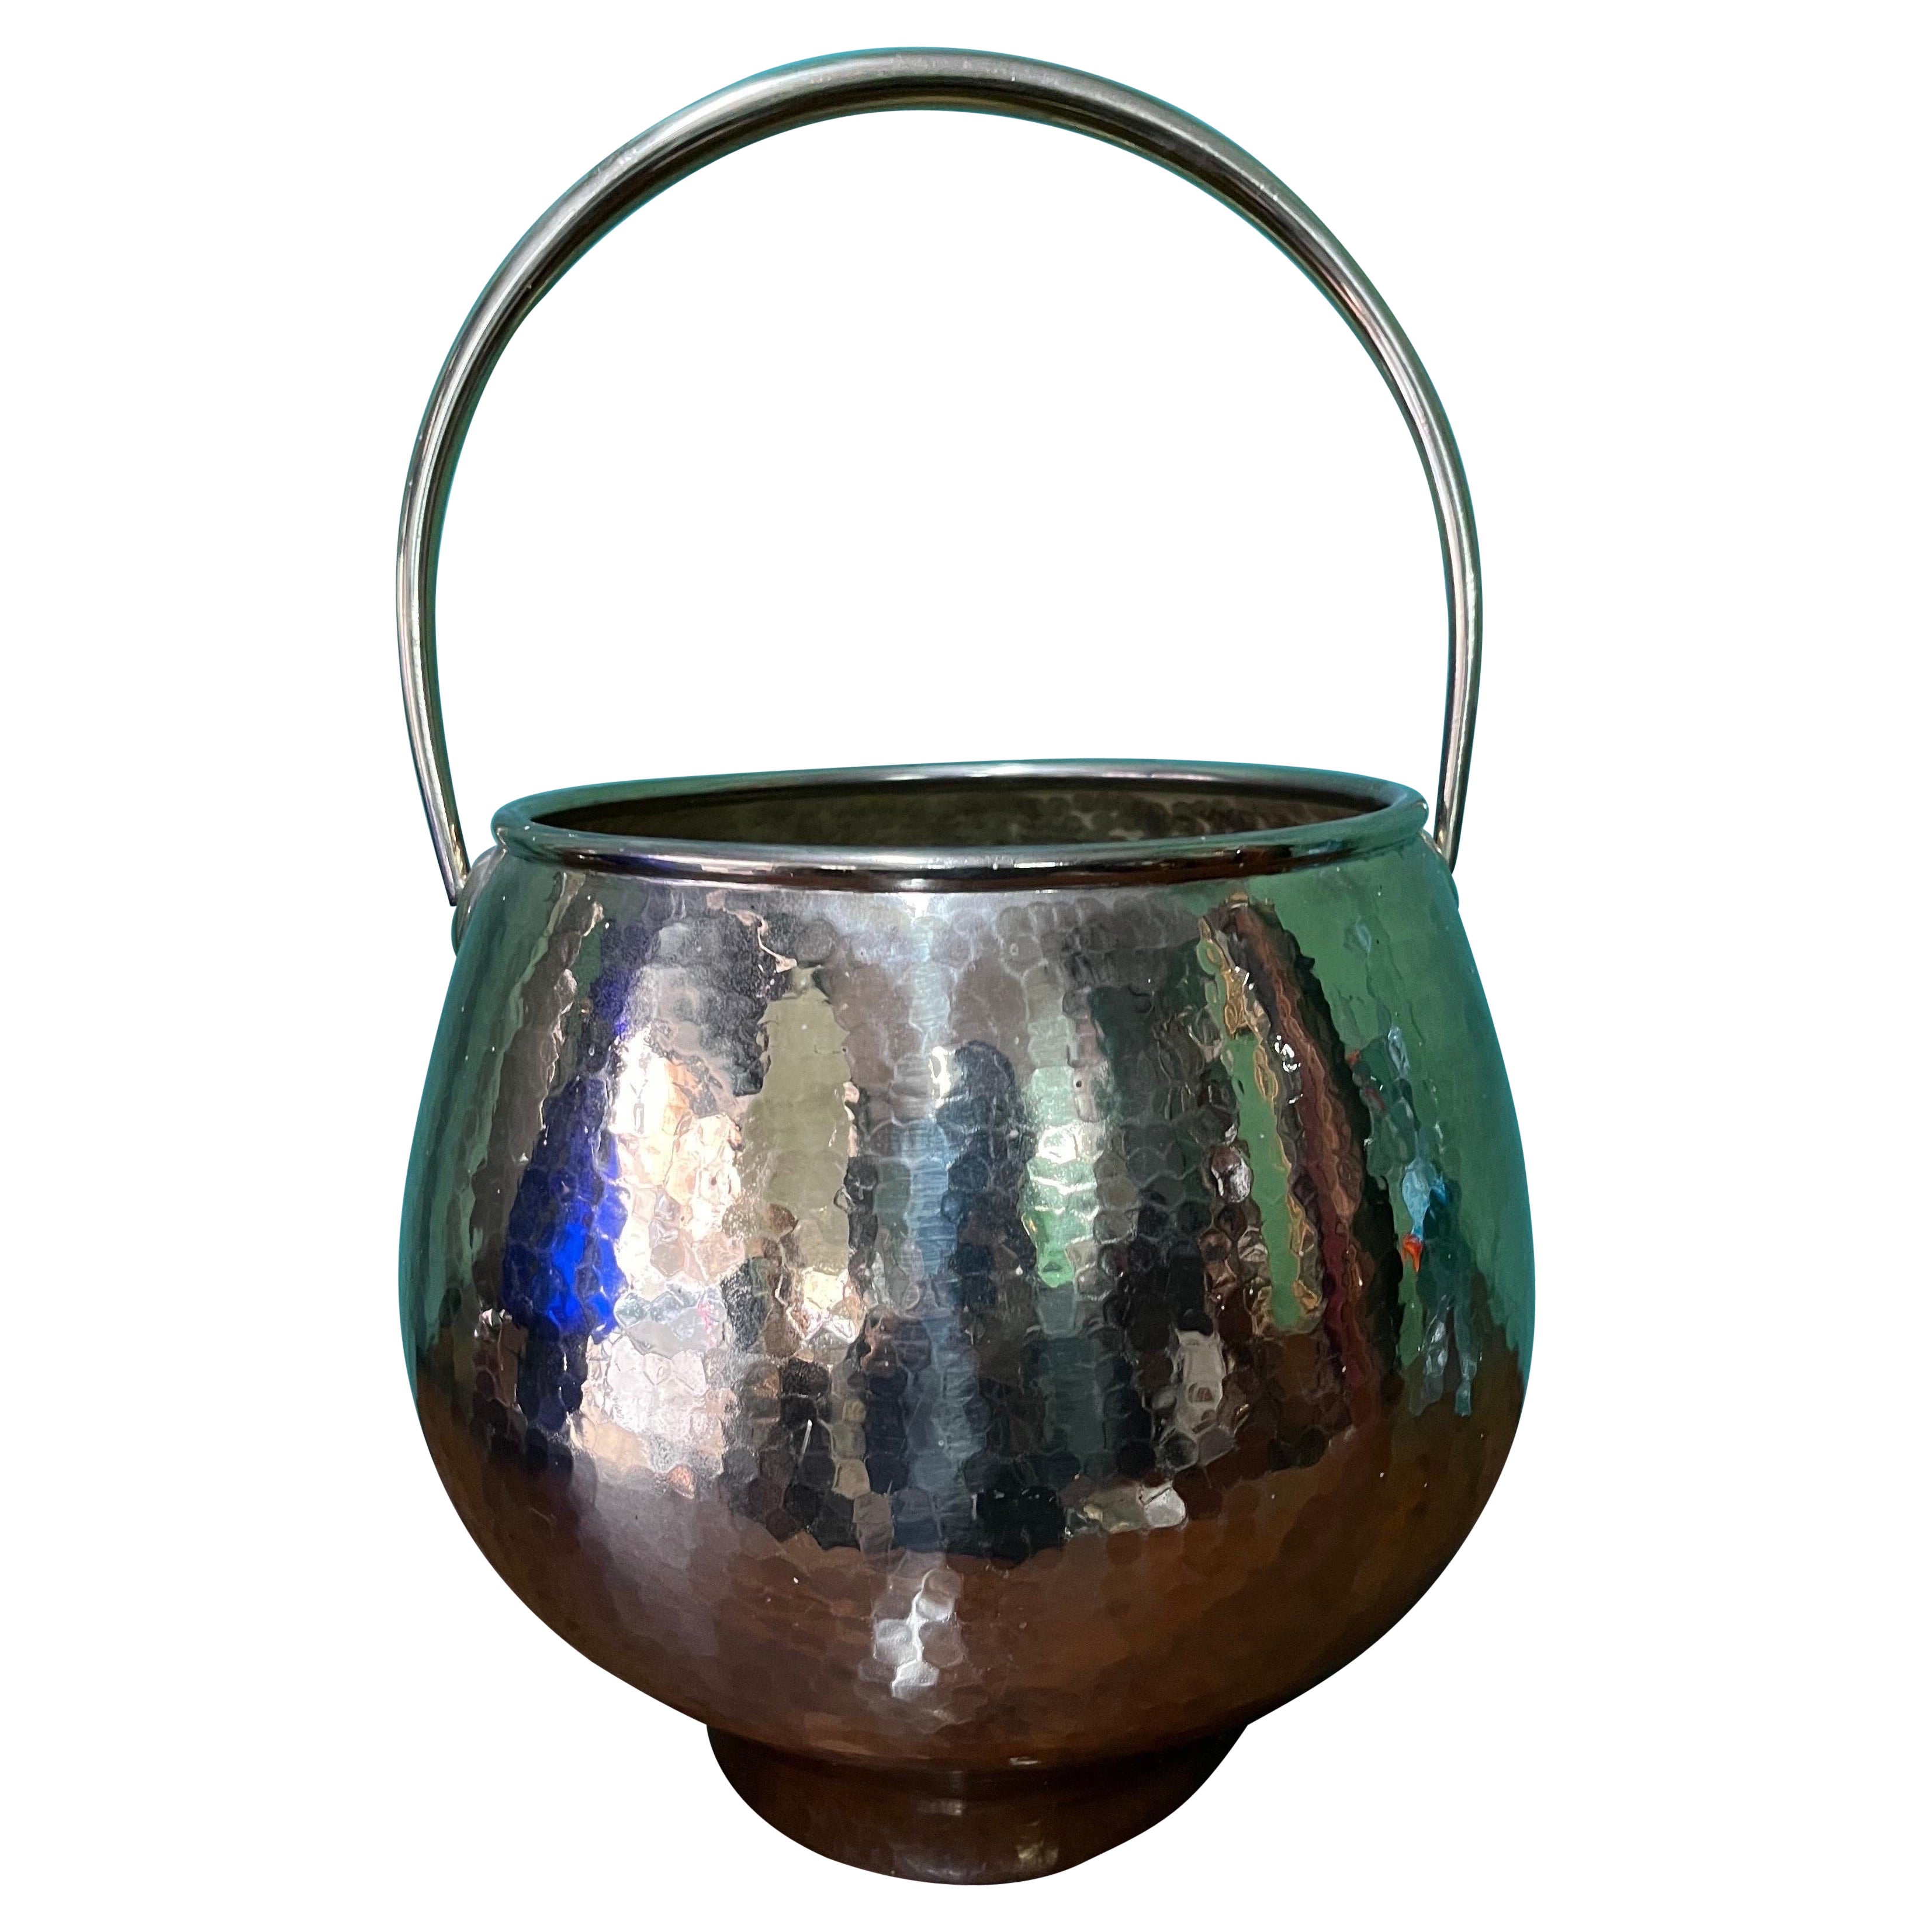 Hammered Brass Drink Holder Basket from the 1950s